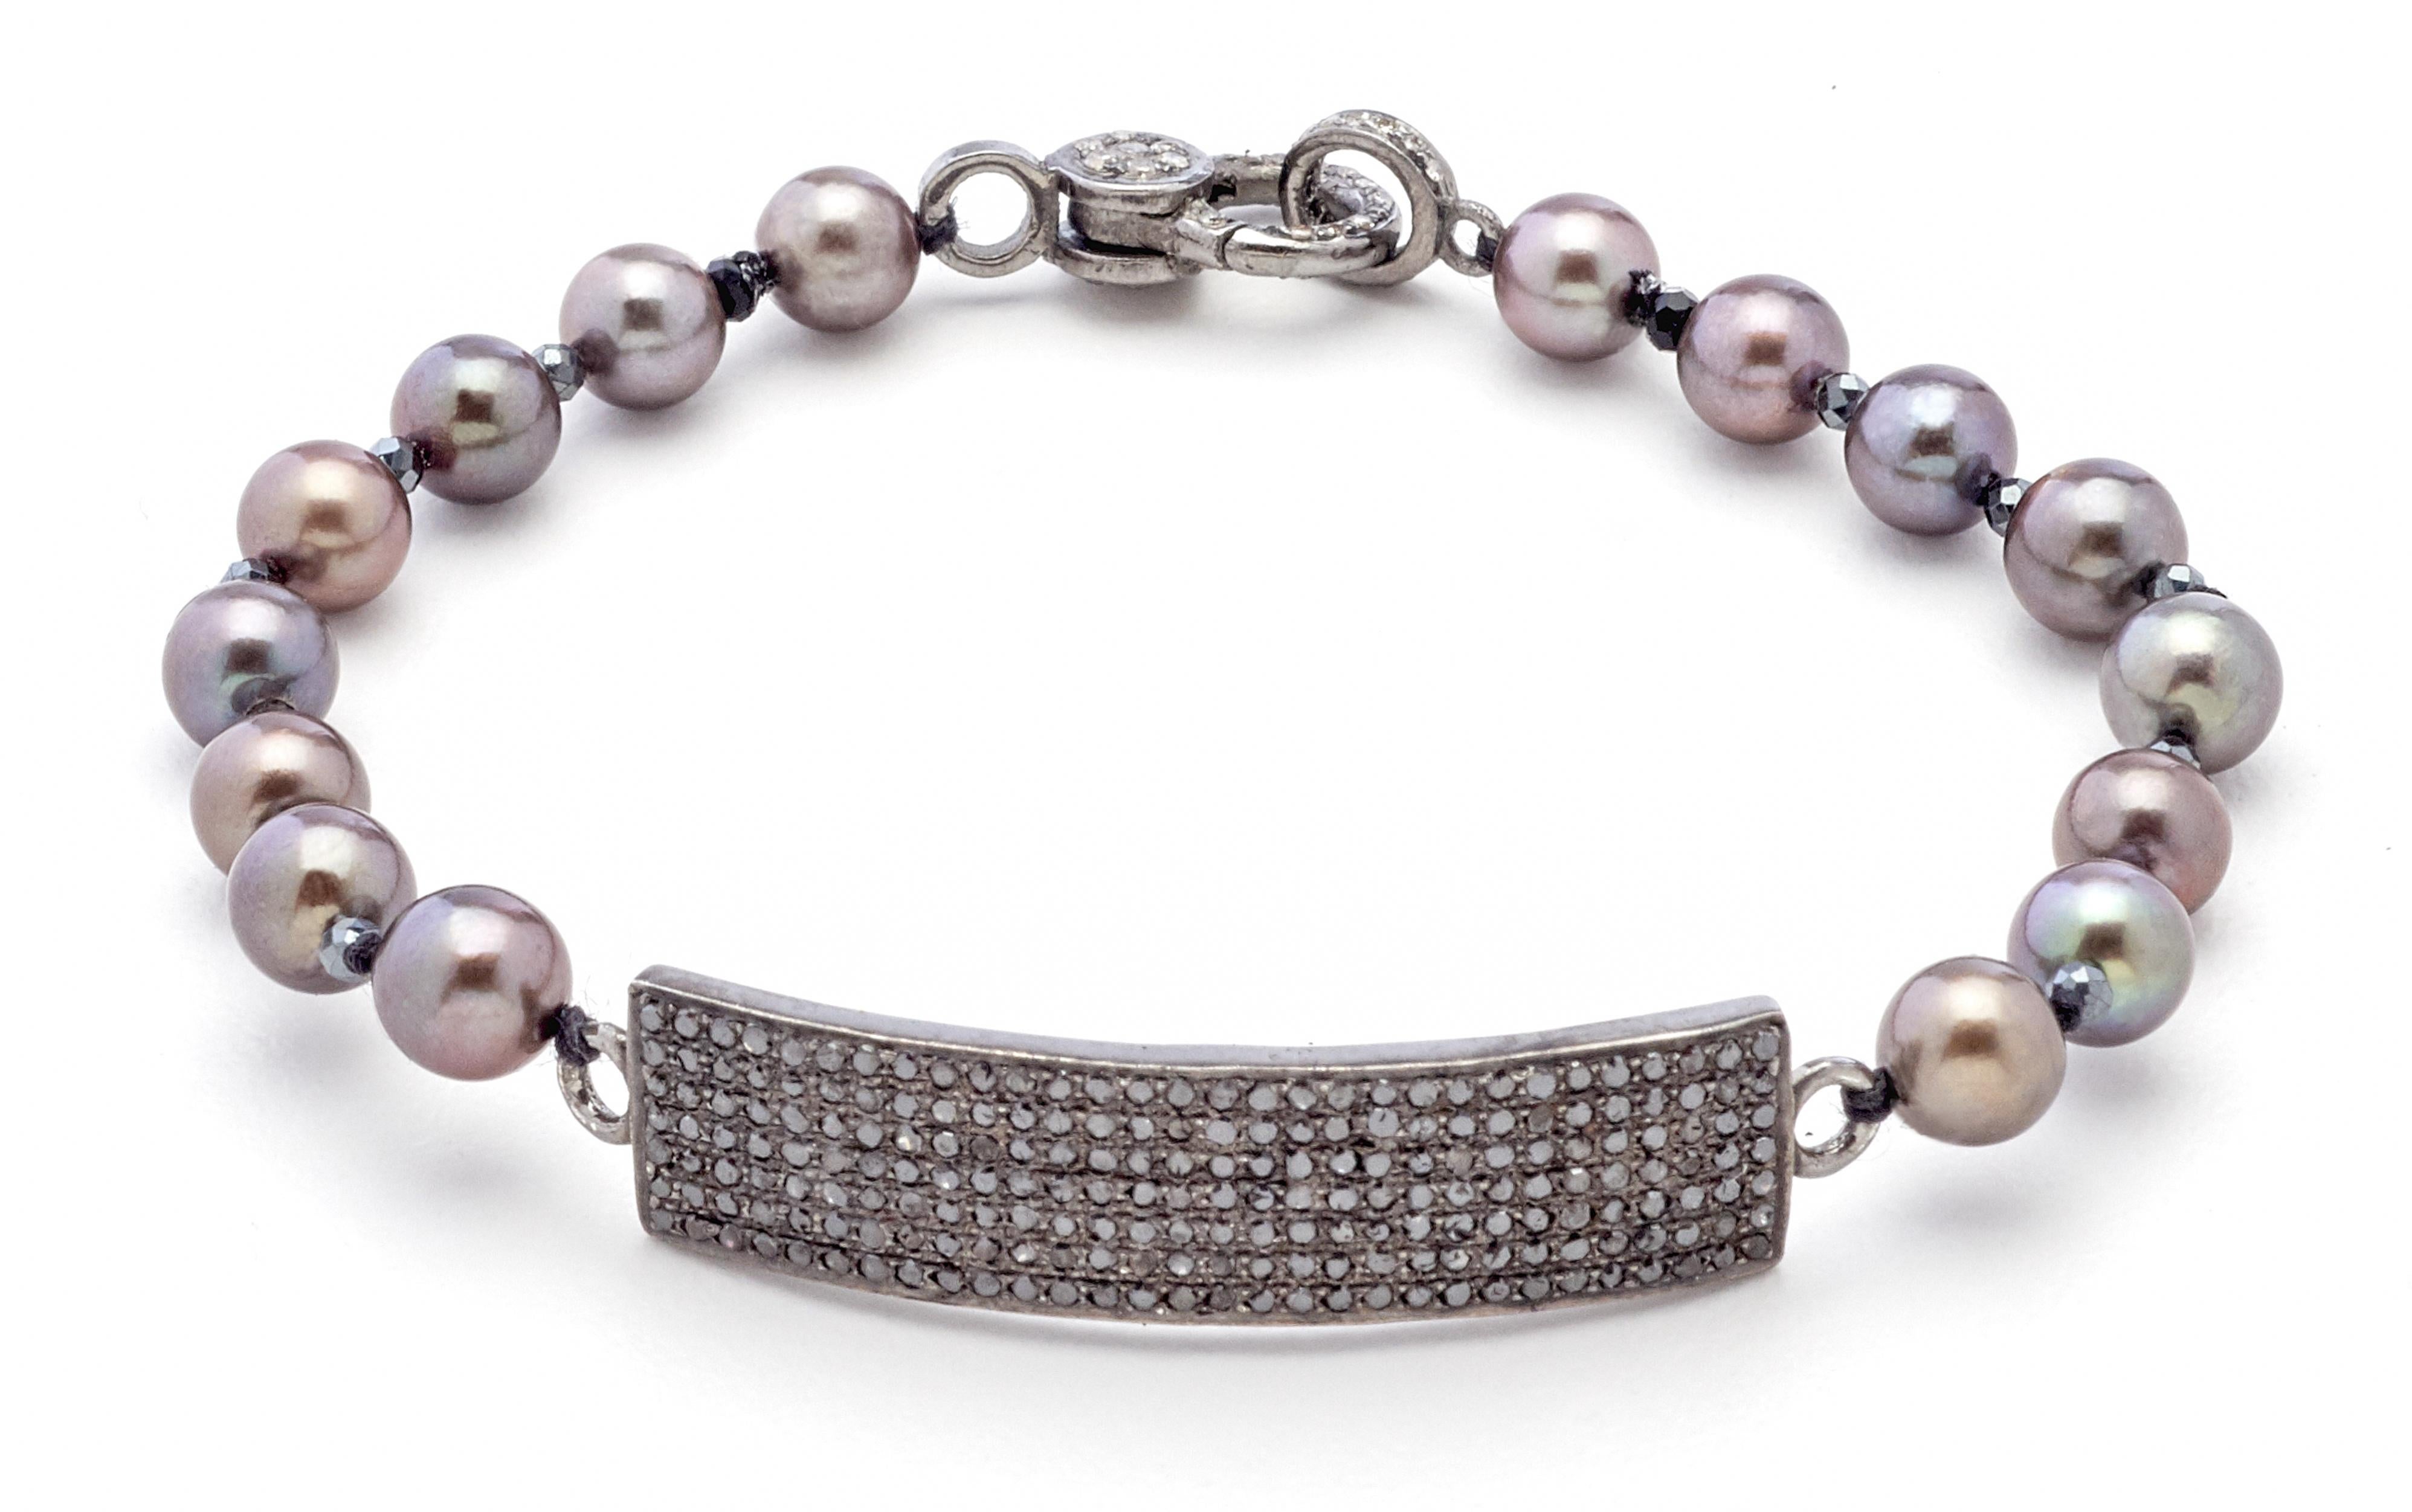 Sparkling black spinel glistens in an attractive rectangular shape silver bar feature lending a modern twist to this artisan created slate-toned pearl bracelet. You will love the versatile dark neutral hues of this seven inch hand- strung 6mm akoya